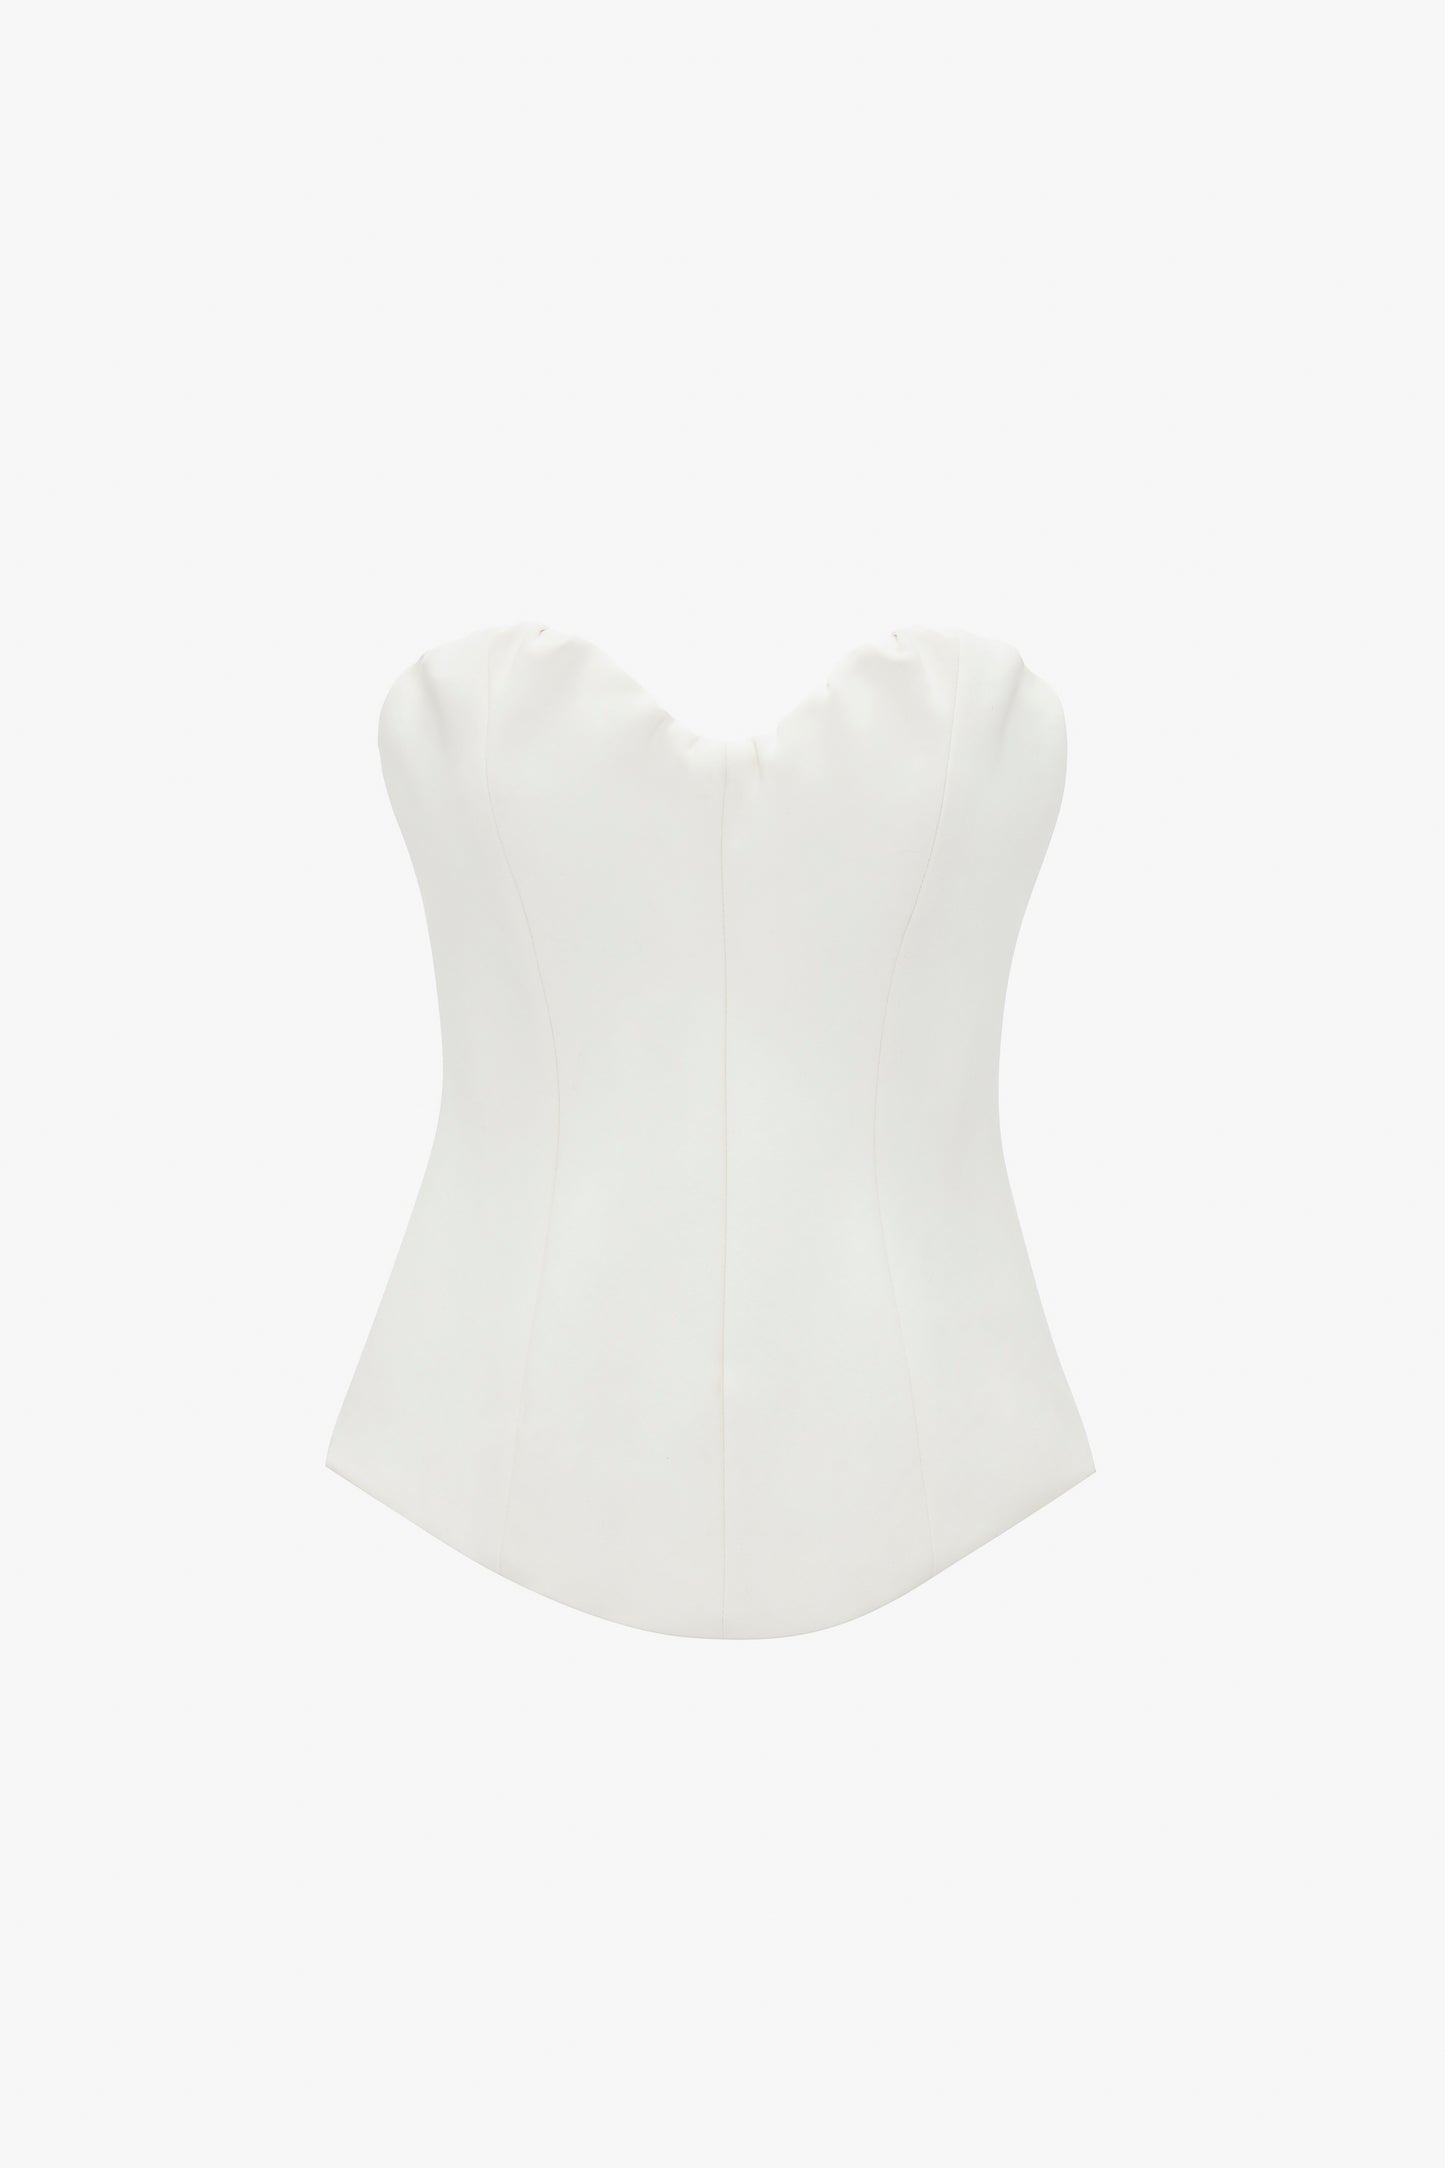 White strapless Victoria Beckham corset top with a sweetheart neckline, displayed against a plain white background.